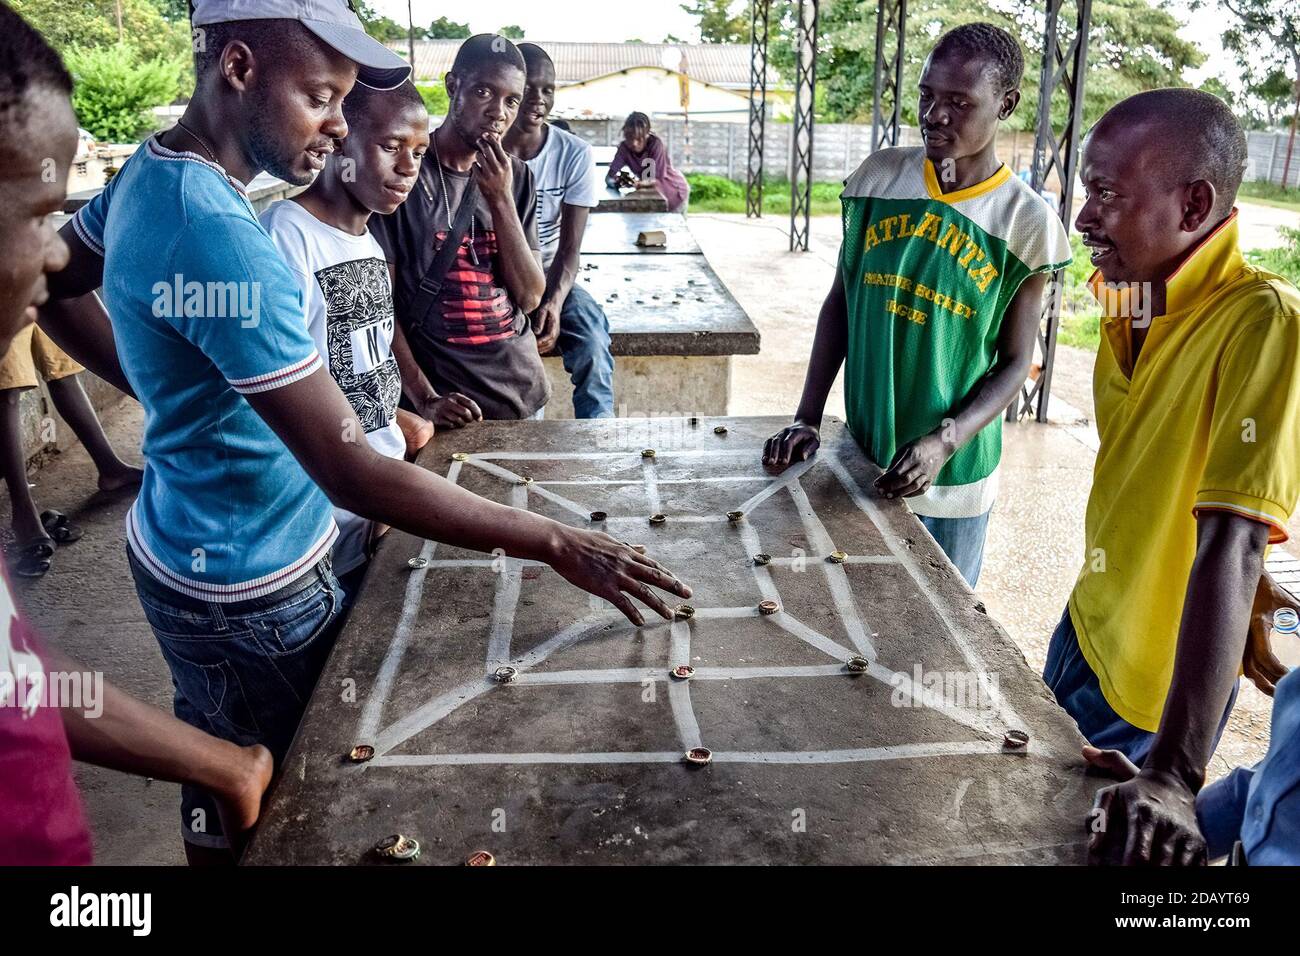 Tatenda Seremwe (second from left) and Tonderai Goreraza (second from right) play Three Make a Line, a game they play on weekends in Mabvuku, Zimbabwe Stock Photo